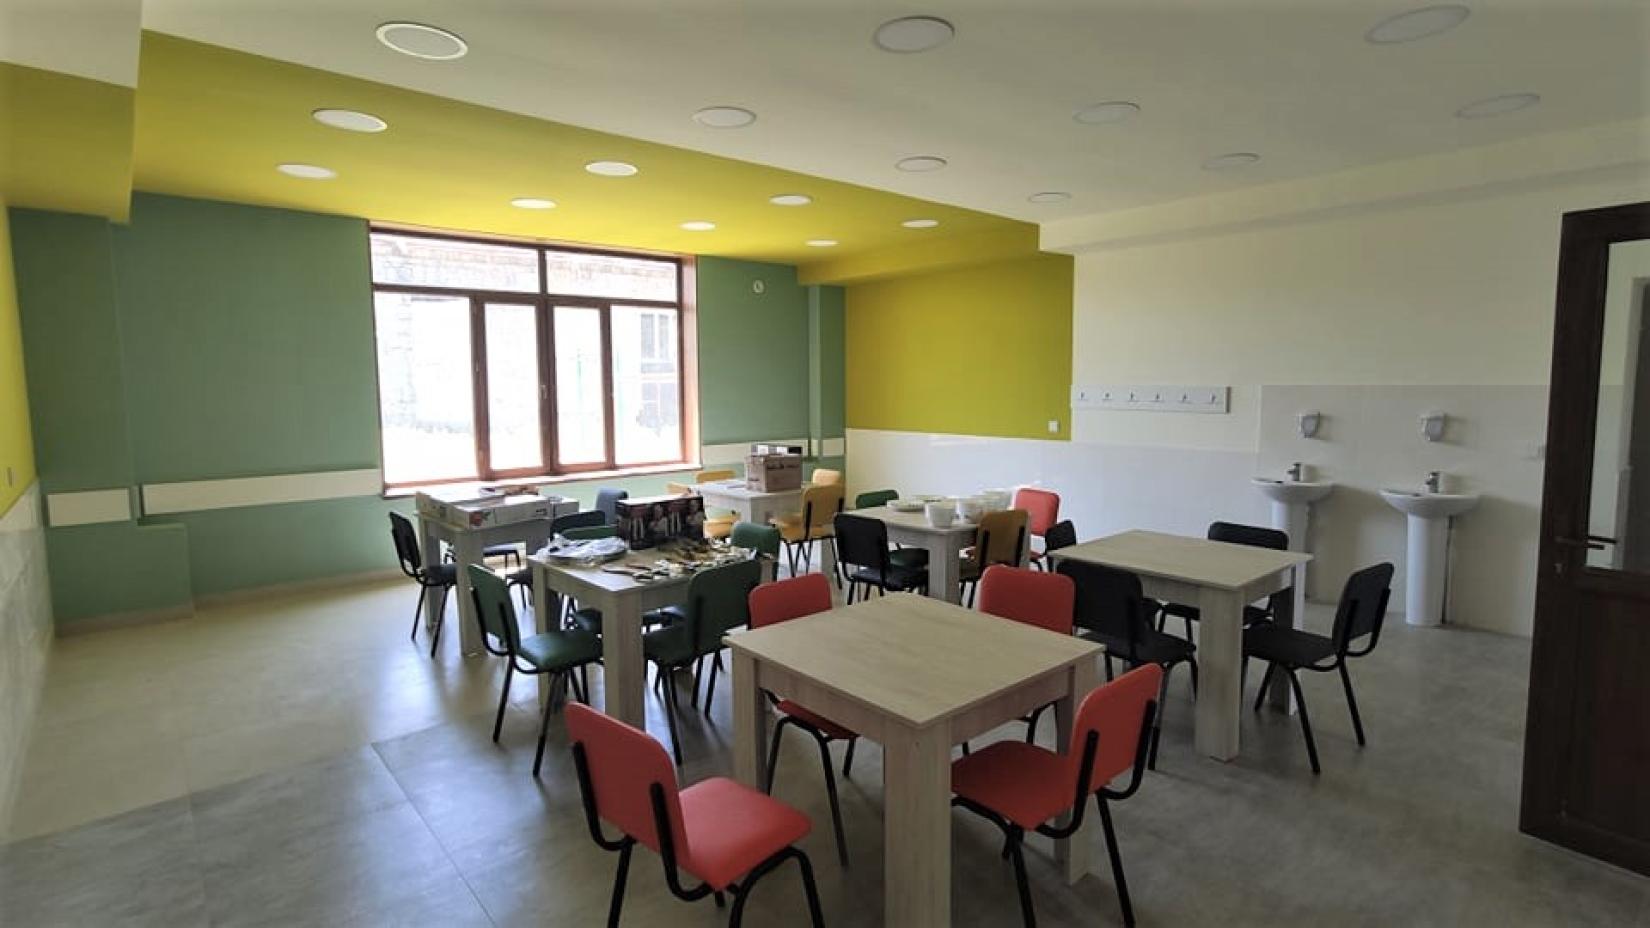 Renovated and bright room at one of the most vulnerable schools located in the bordering communities of Armenia. 